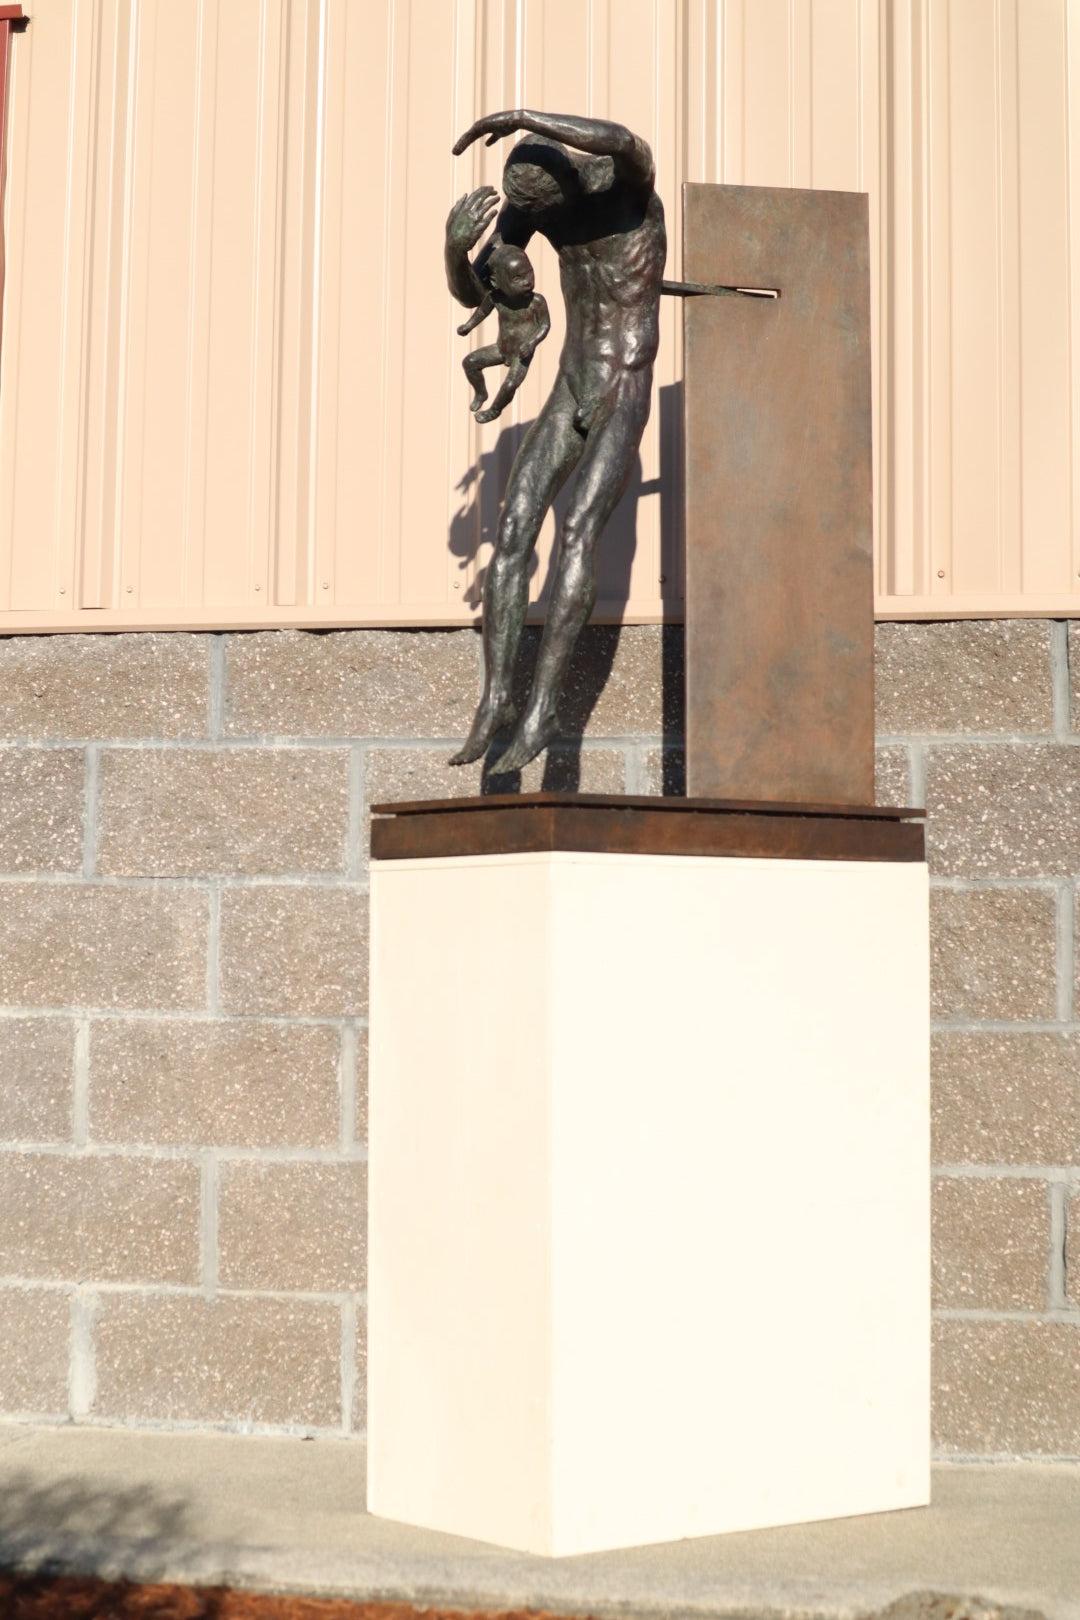 TREVOR SOUTHEY BRONZE SCULPTURE, "FATHERHOOD", DEPICTION OF MAN WITH INFANT, BRONZE AND STEEL, WITH BASE